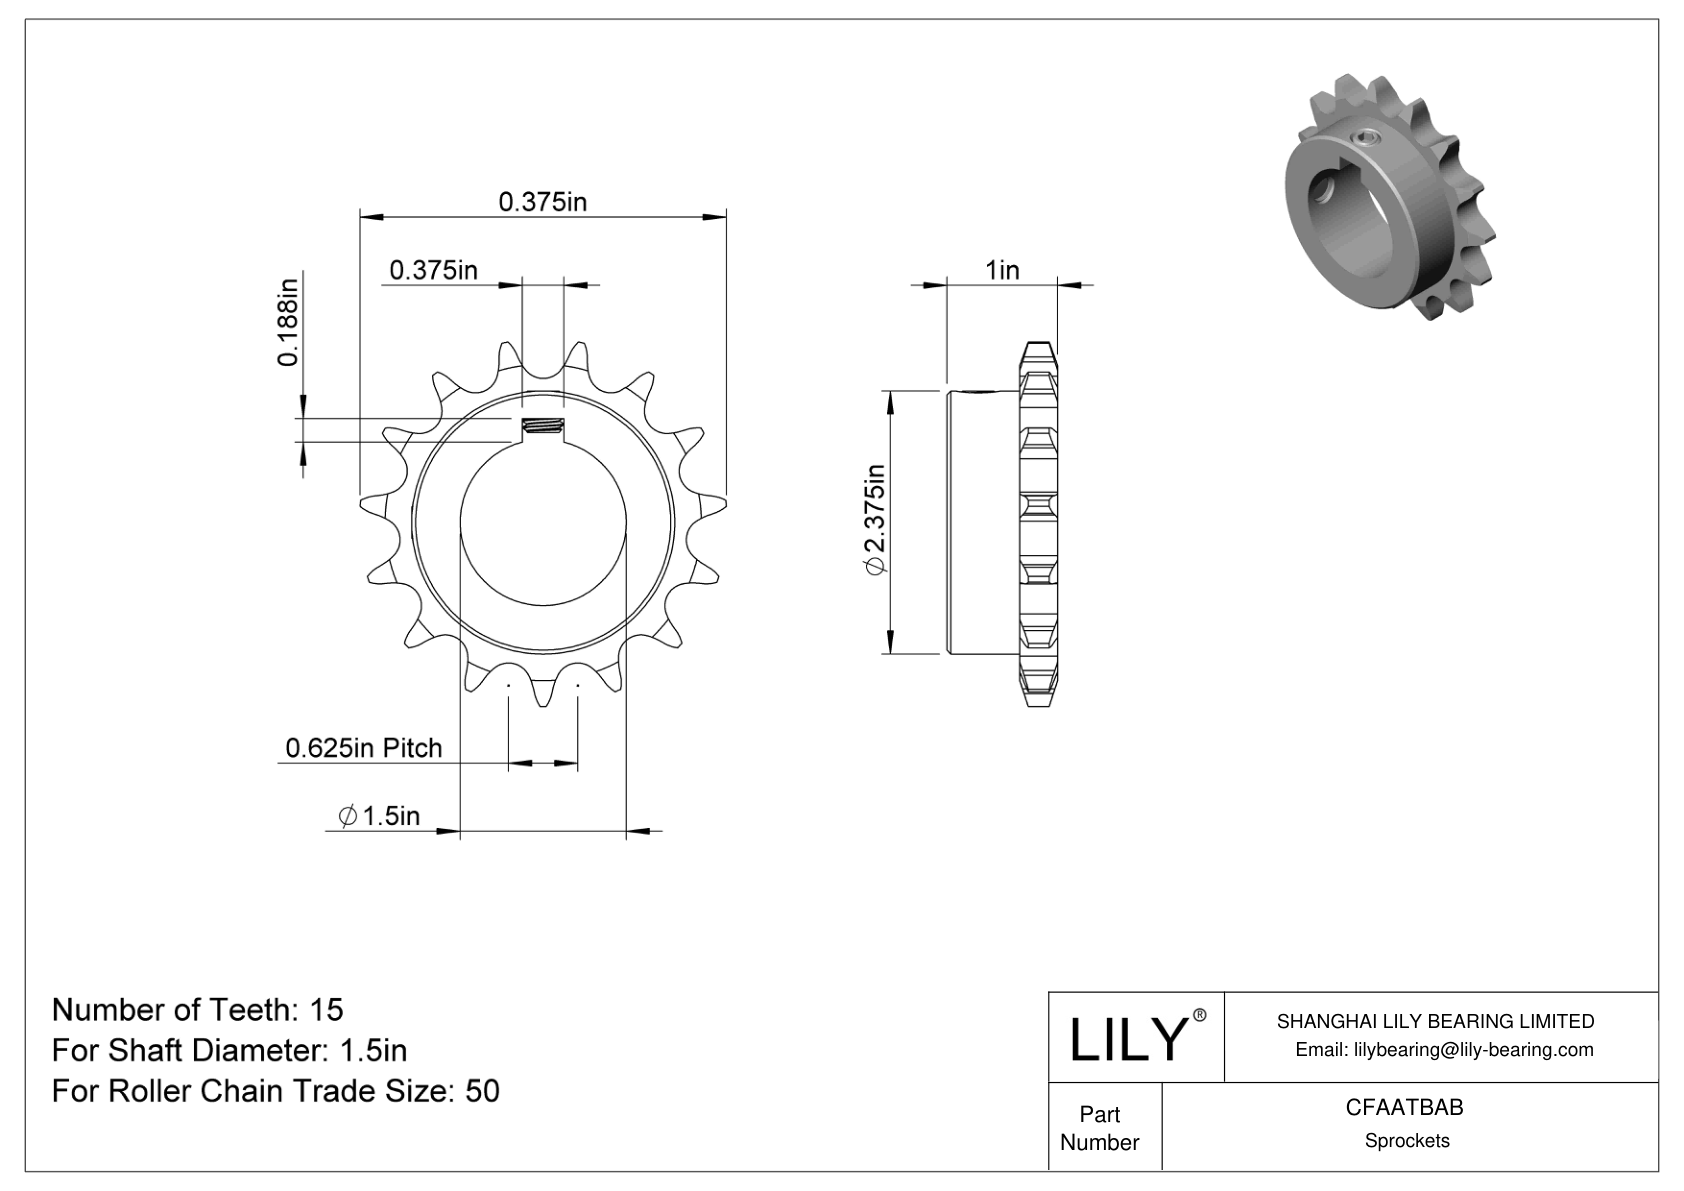 CFAATBAB Wear-Resistant Sprockets for ANSI Roller Chain cad drawing